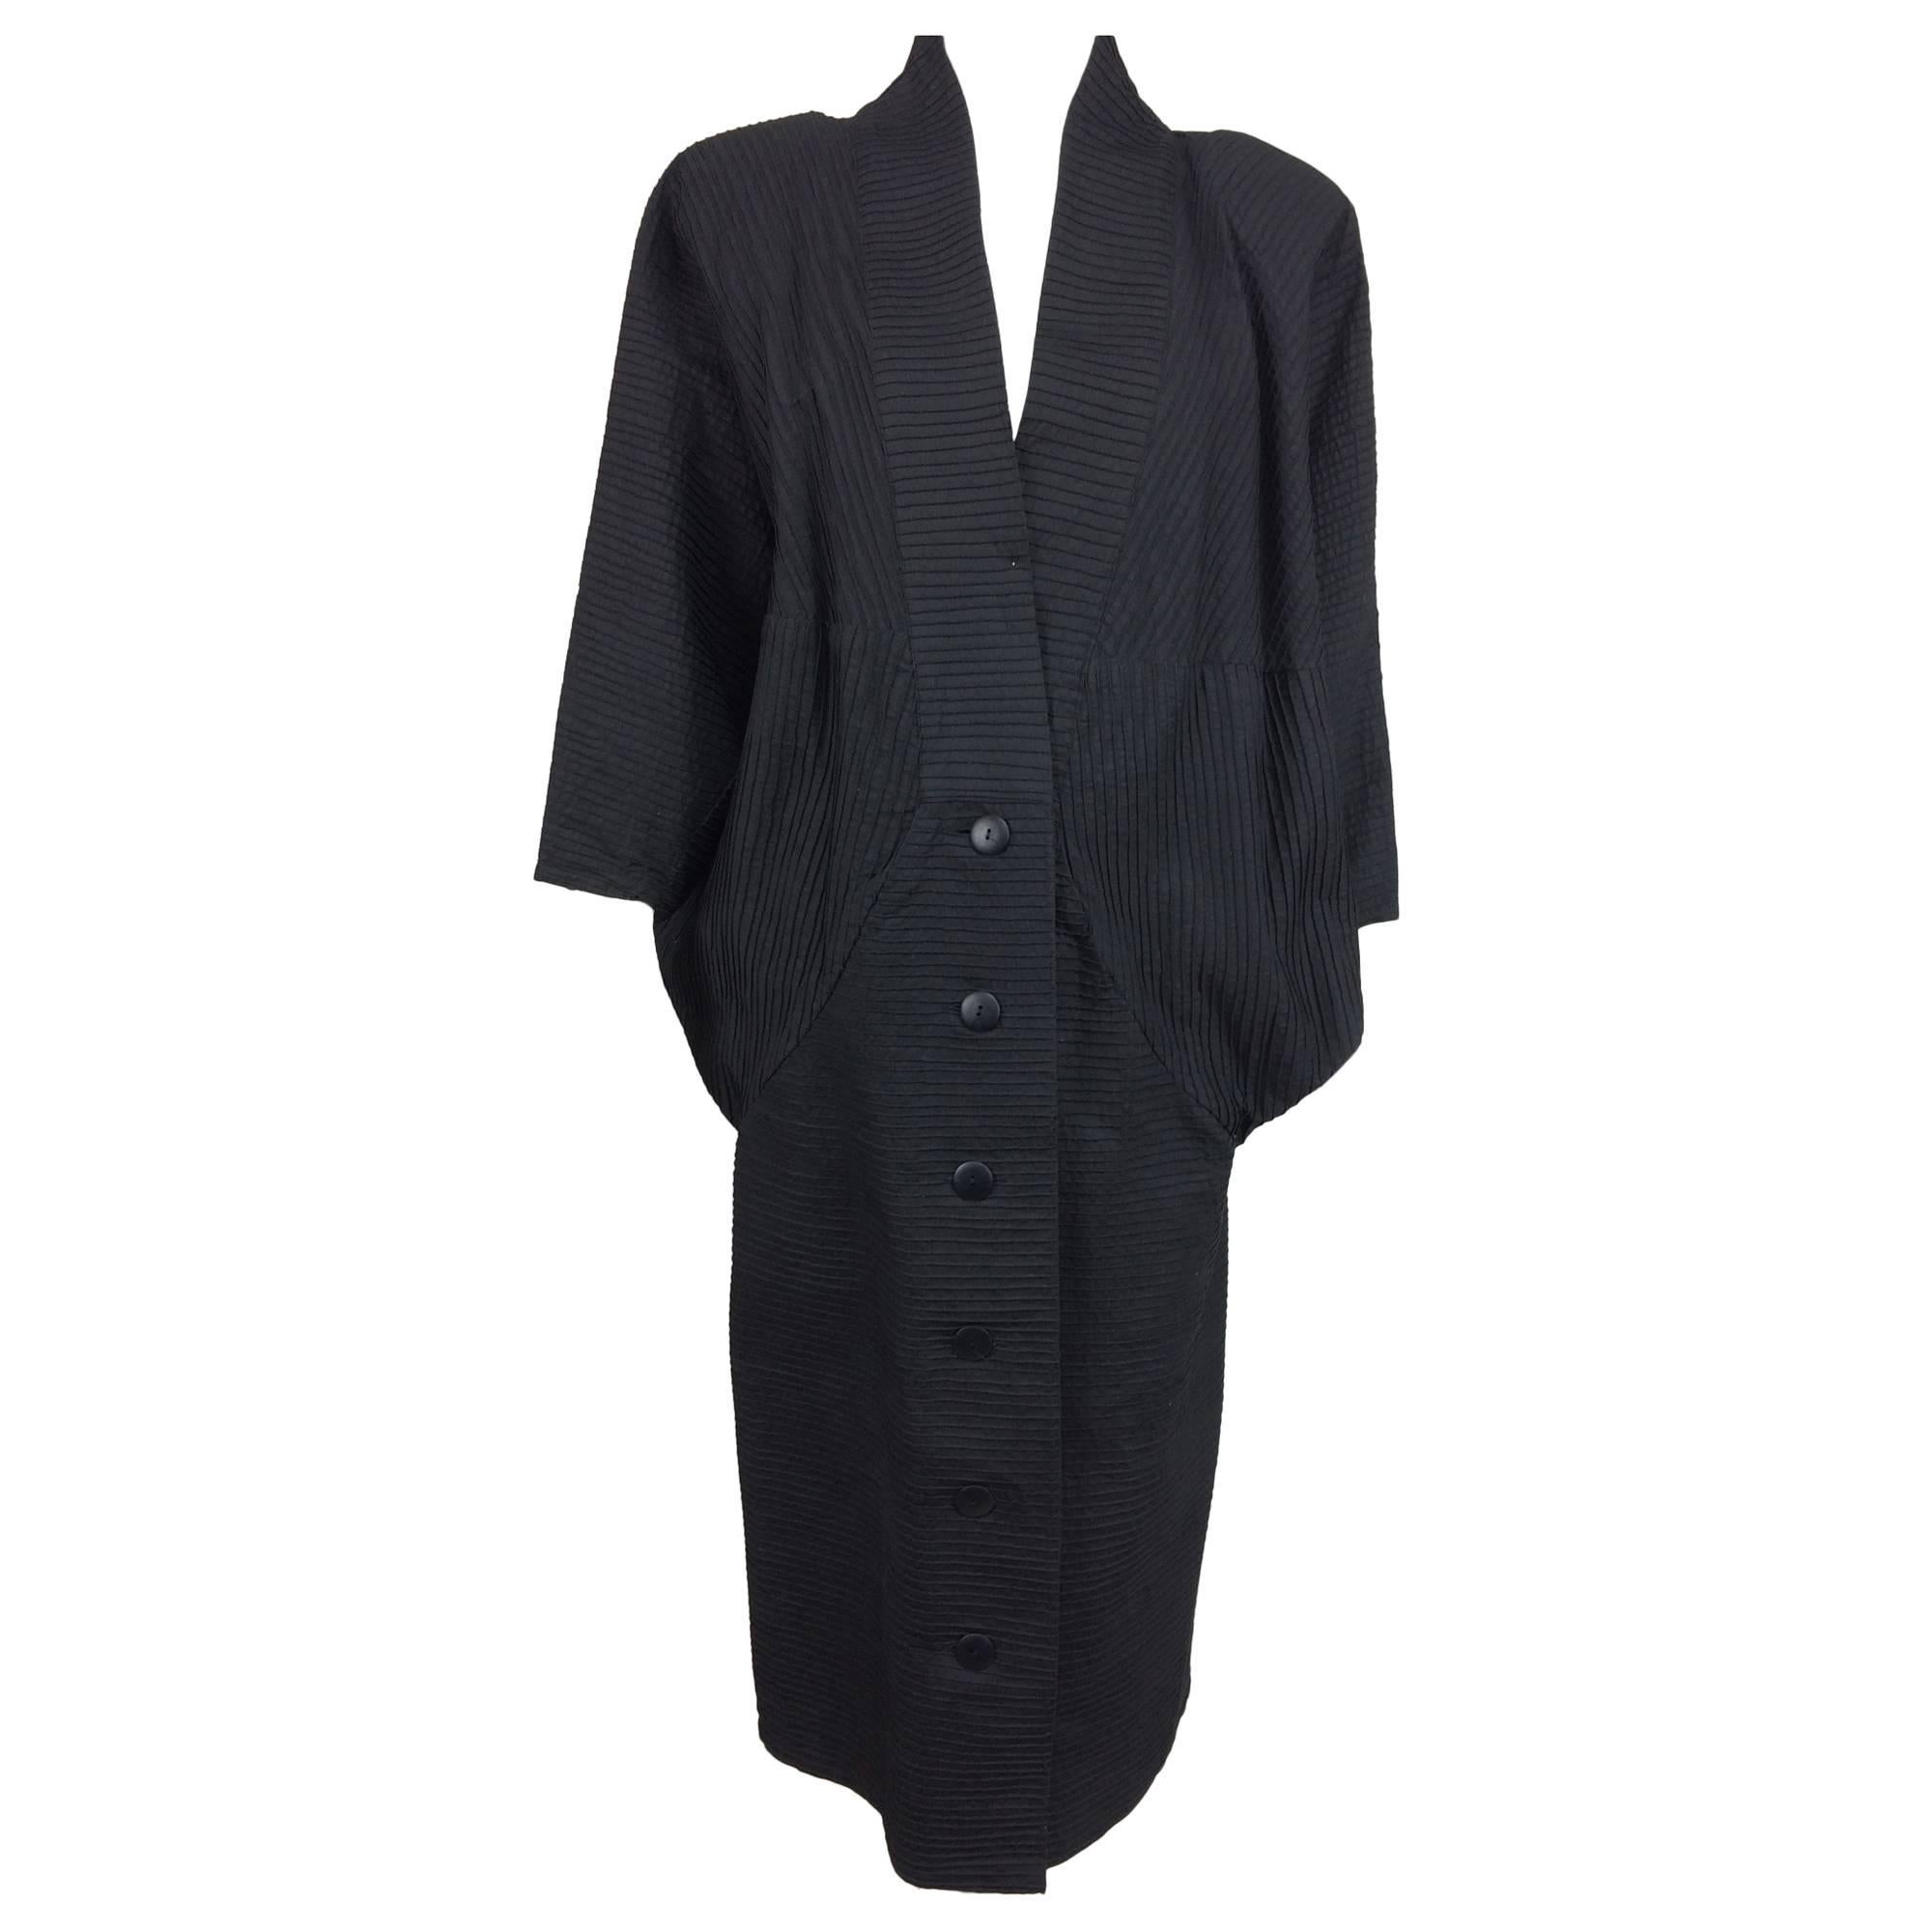 Twins Armoire Boutique Black pin tucked cotton bat wing coat 1980s